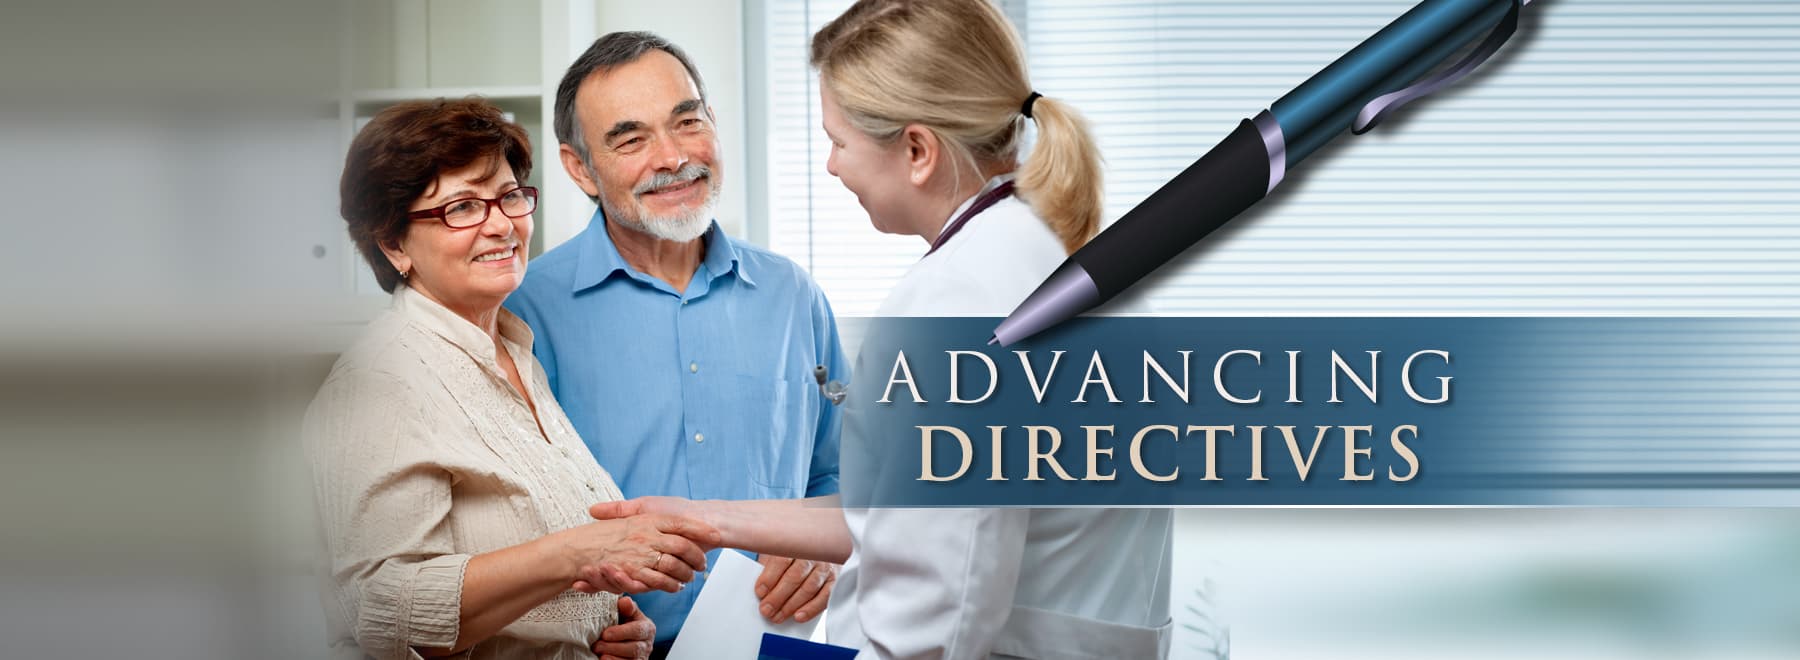 Patient and Doctor discuss Advanced Directives